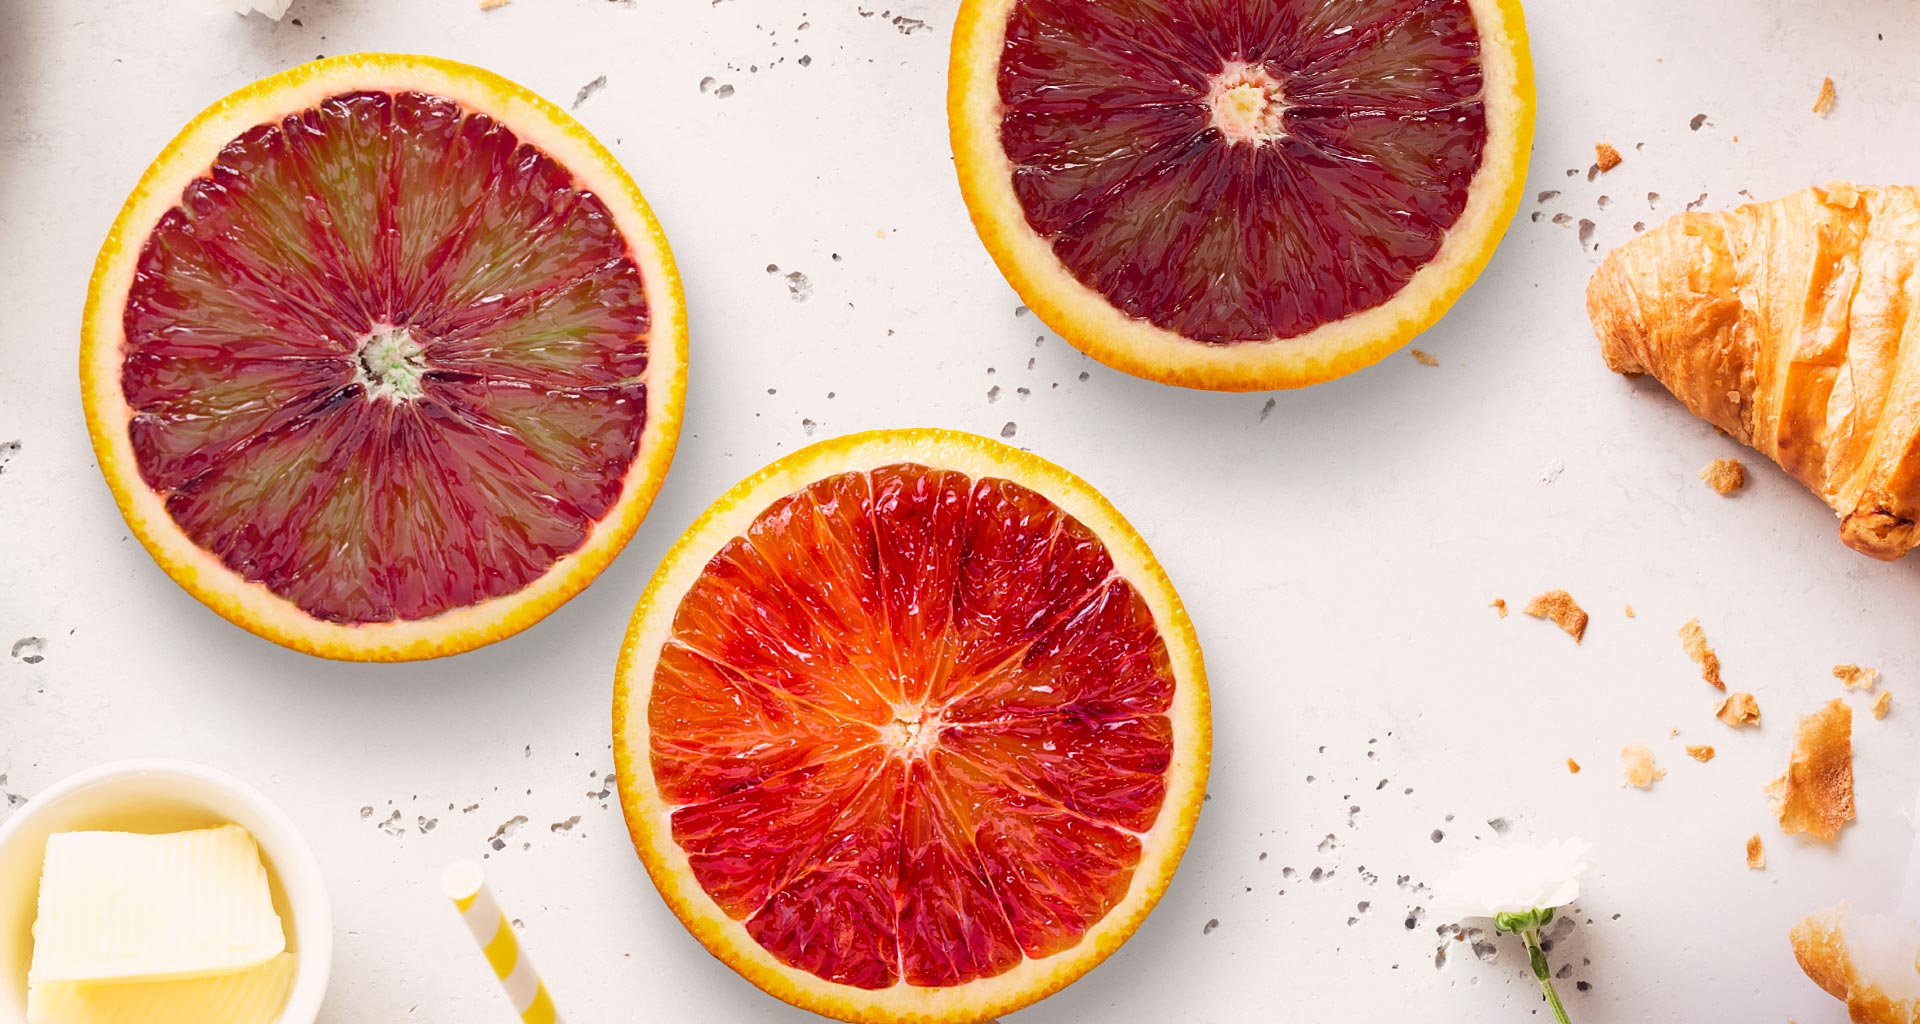 Blood oranges are not all the same